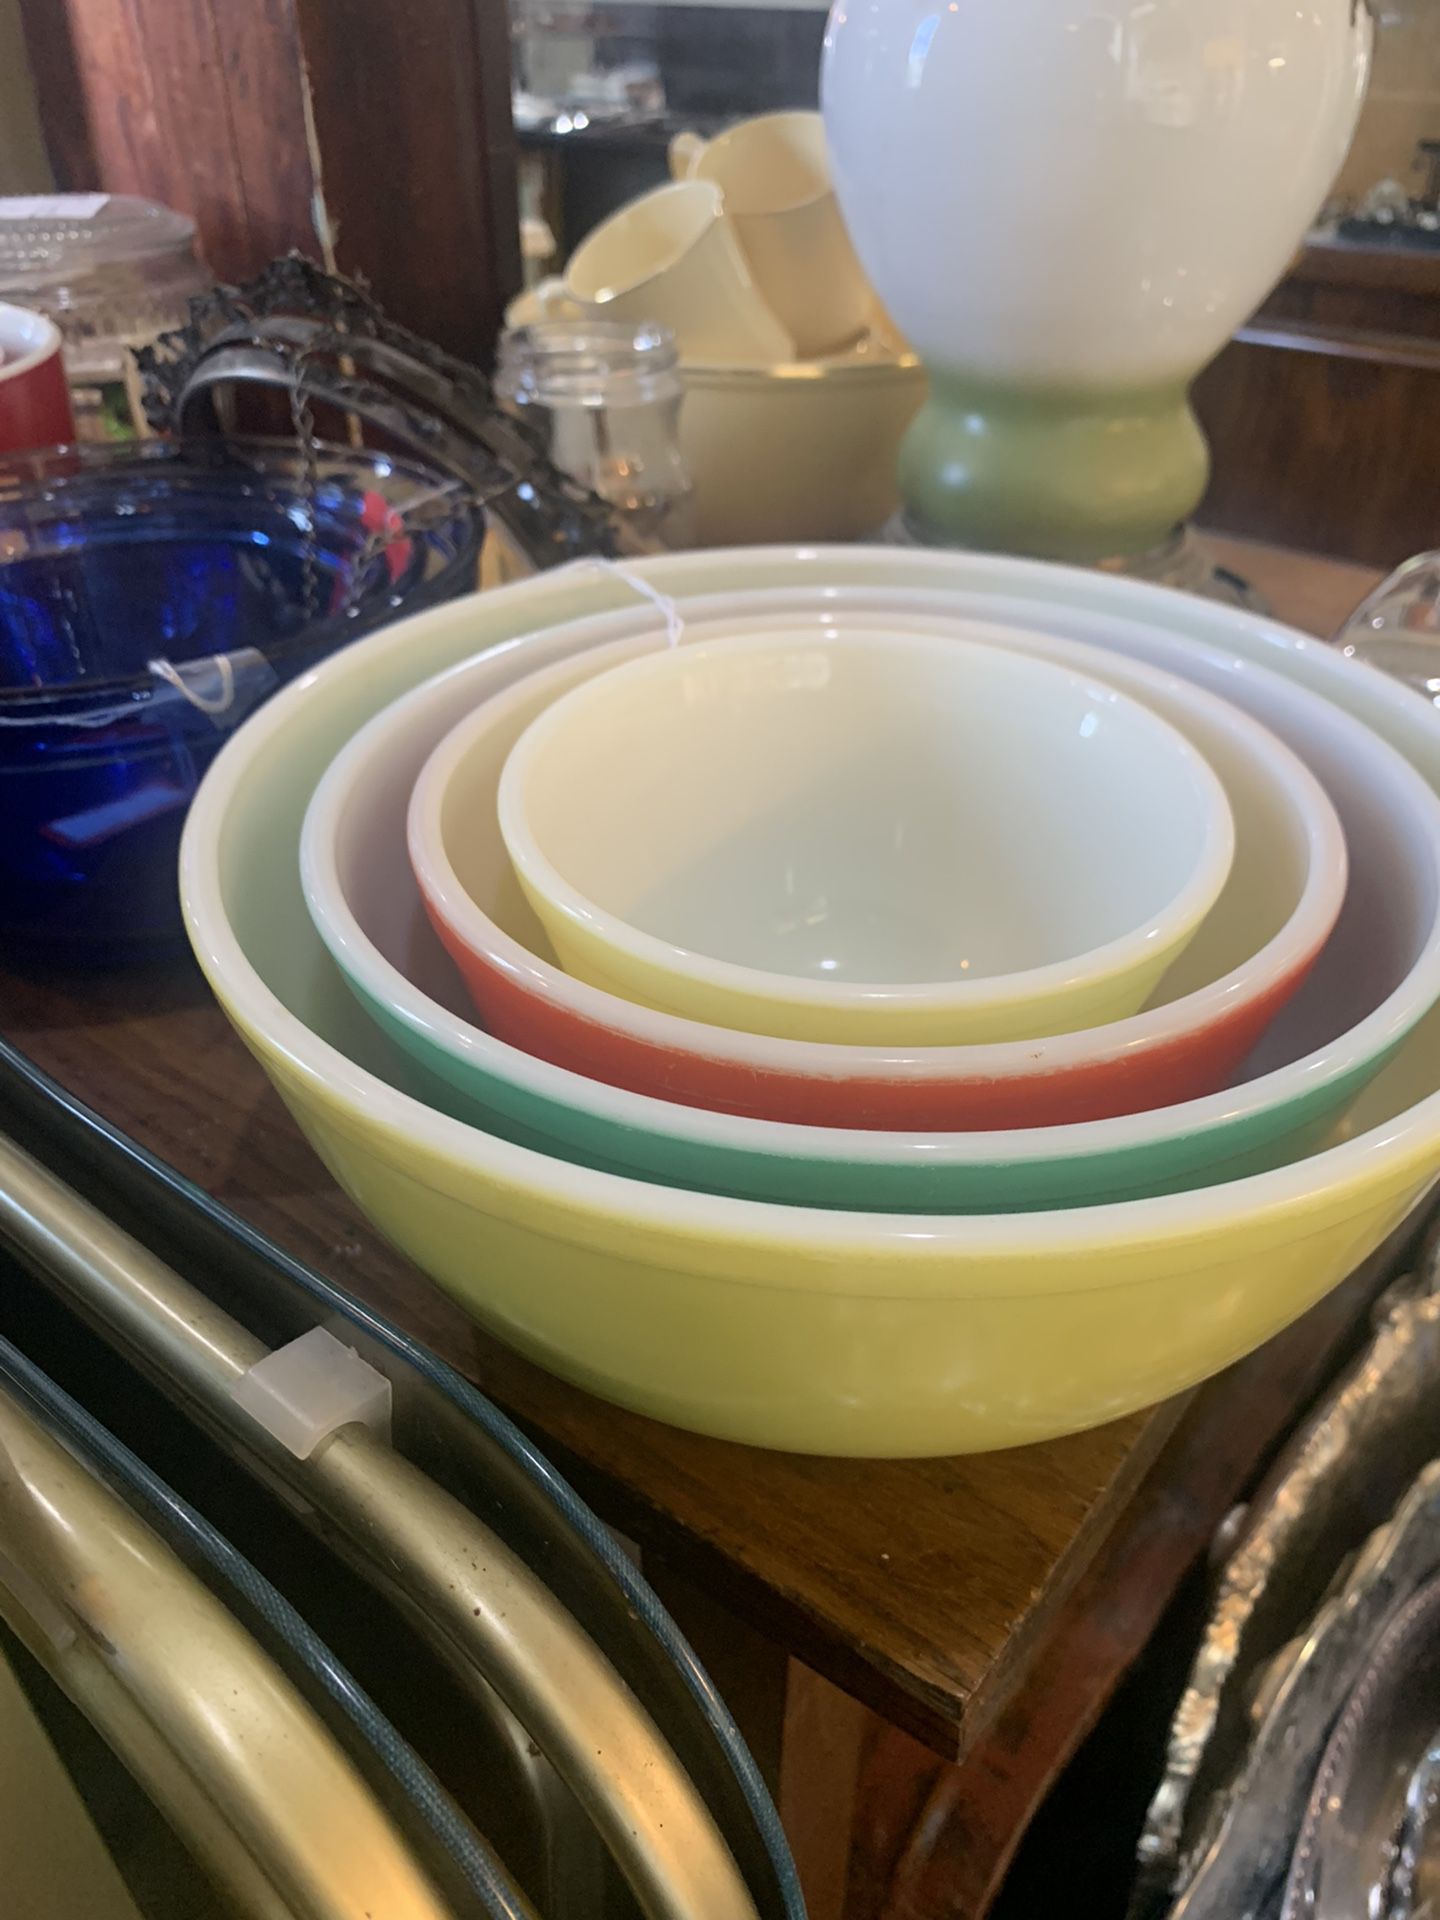 Pyrex and fire king. Different prices. Johanna at Antiques and More. Located at 316b Main Street Buda. Antiques vintage retro furniture collectibles m